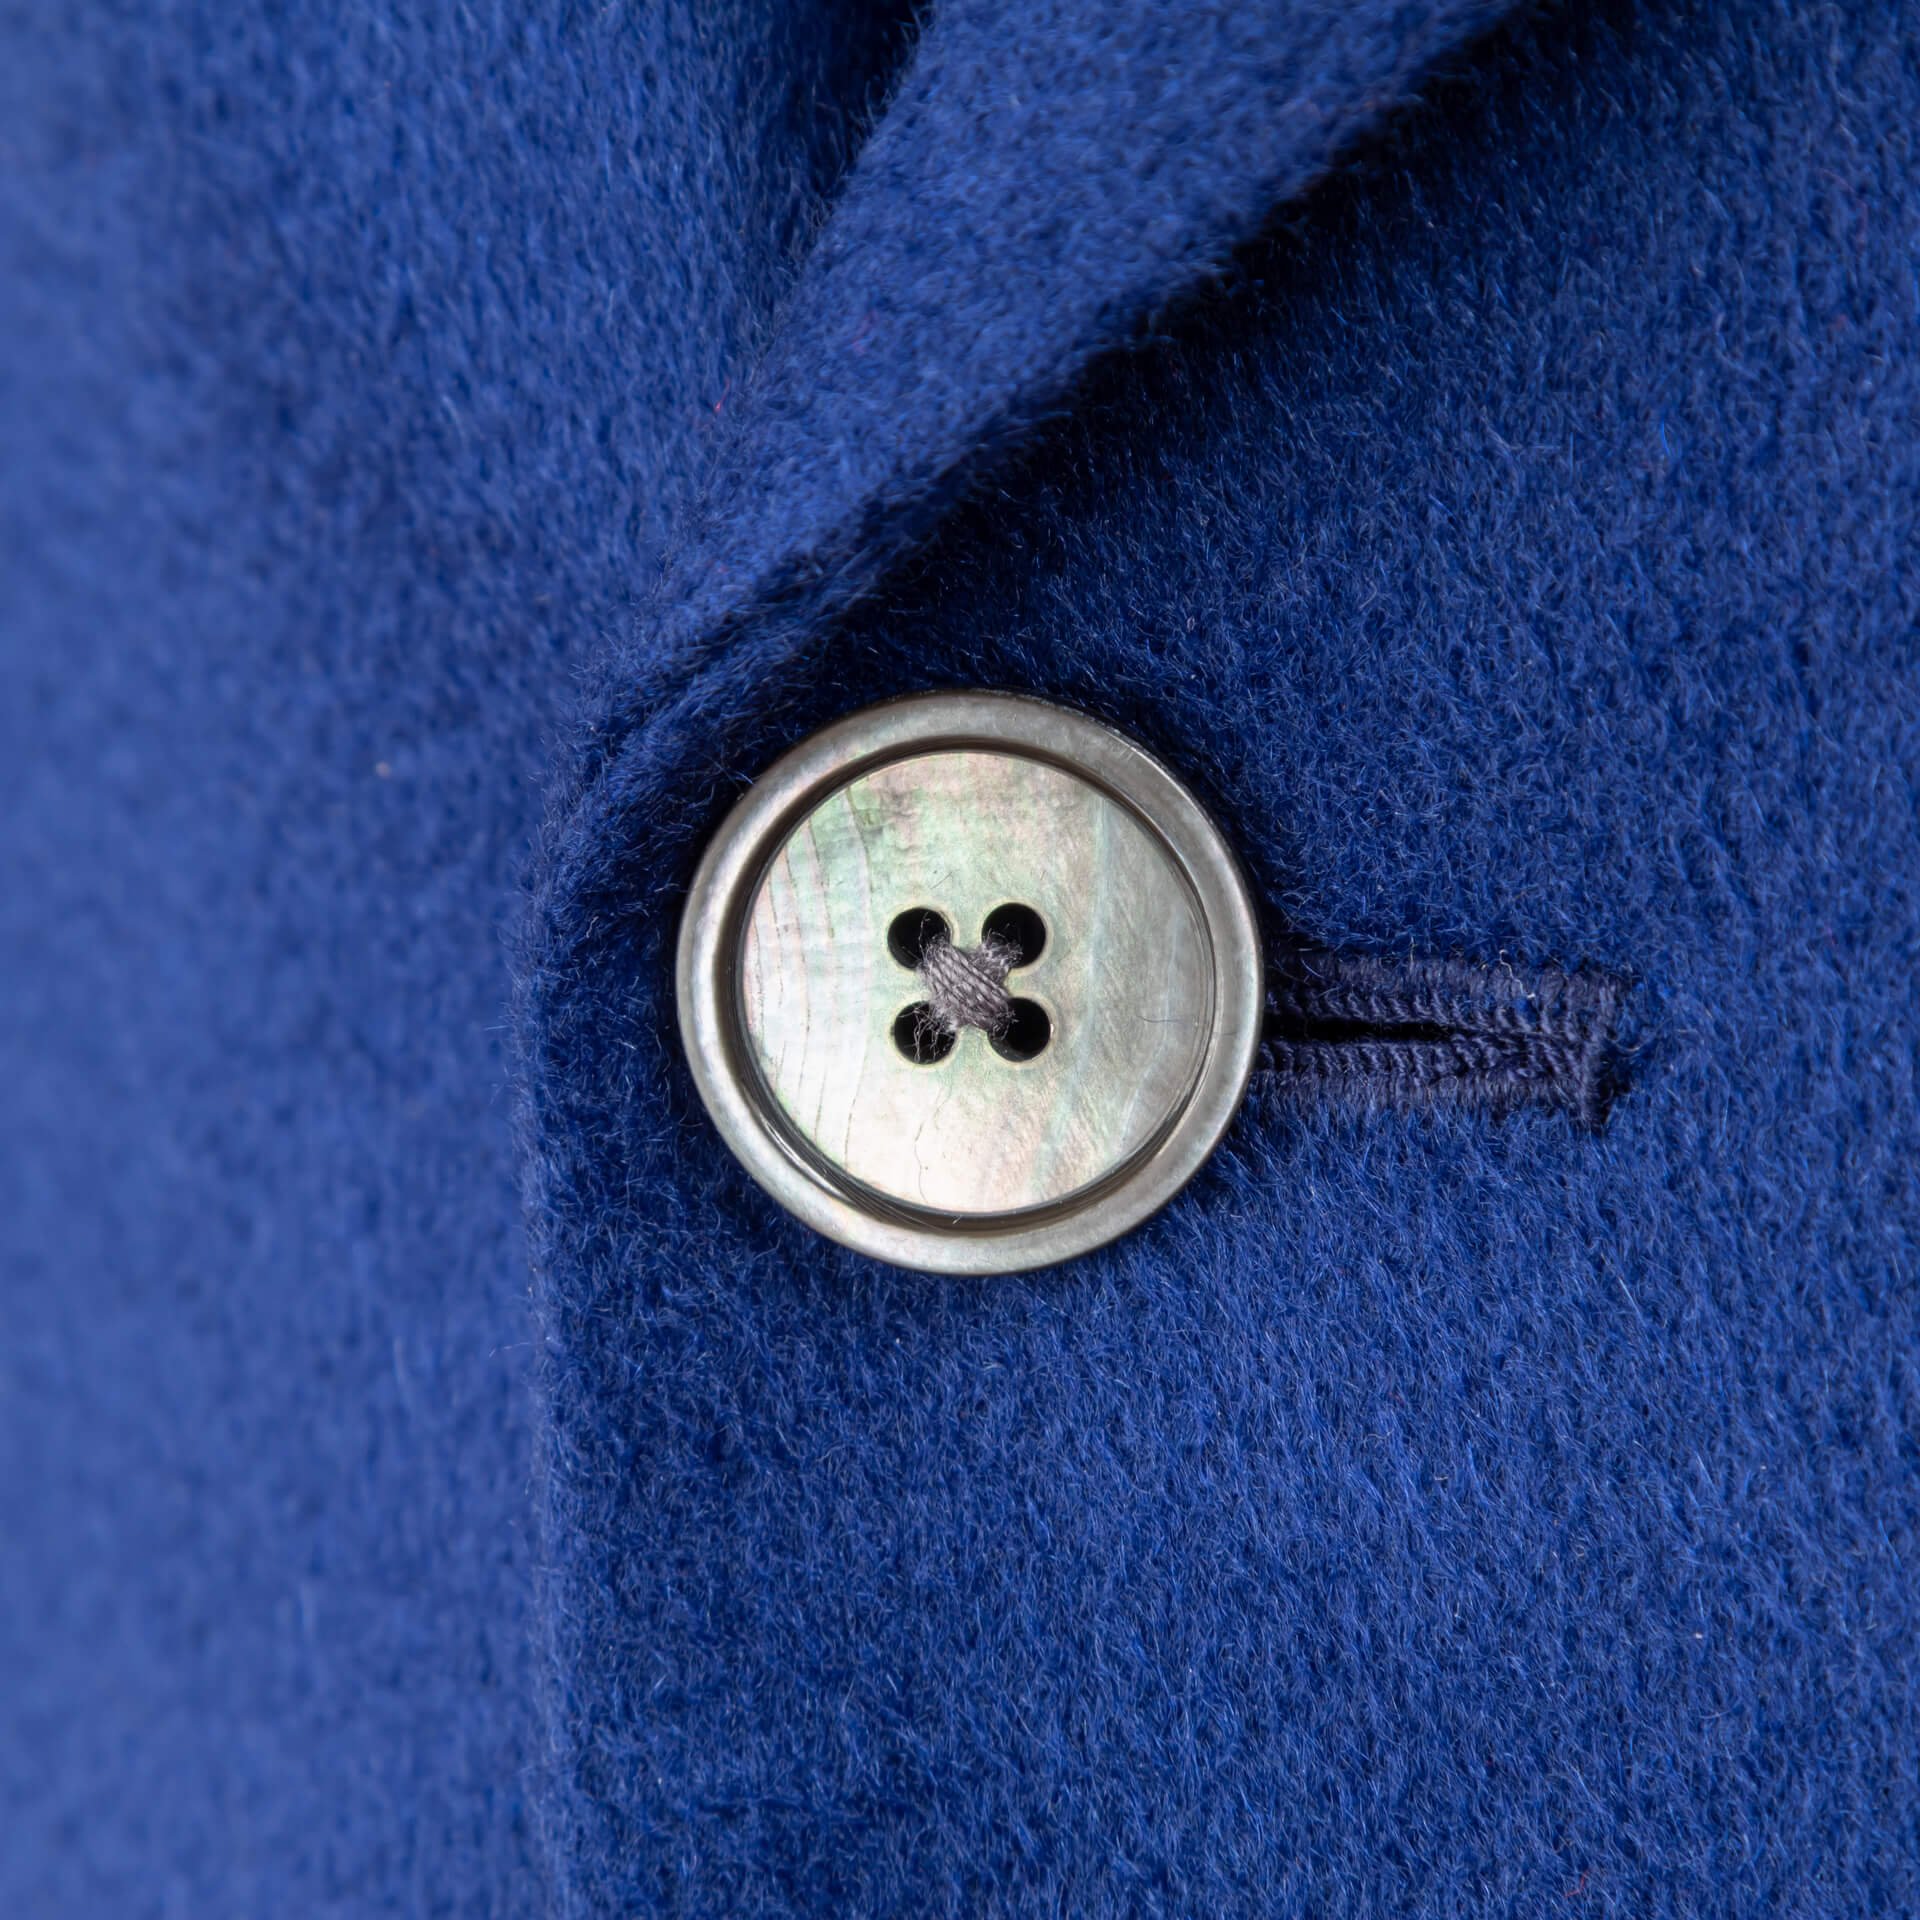 Cashmere Doeskin Overcoat Double Breasted Royal Blue